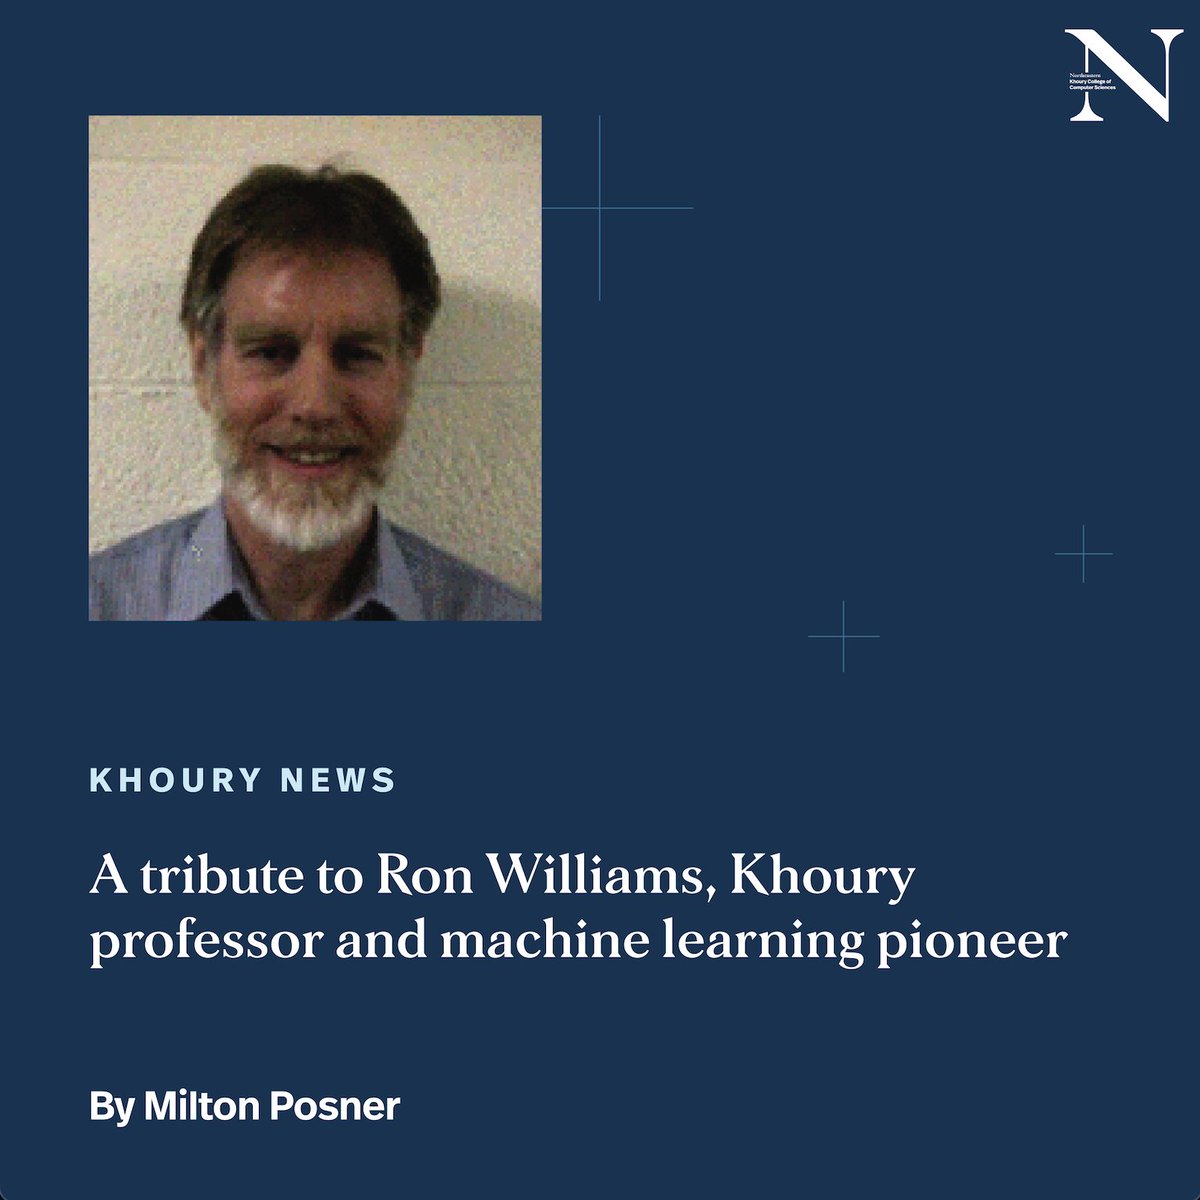 Just weeks after joining Northeastern as a computer science professor, Ron Williams published one of the most impactful papers the has ever seen field. Now, in the wake of his passing, today's technologists are still building on his legacy. Read more: bit.ly/3Tfnnq3